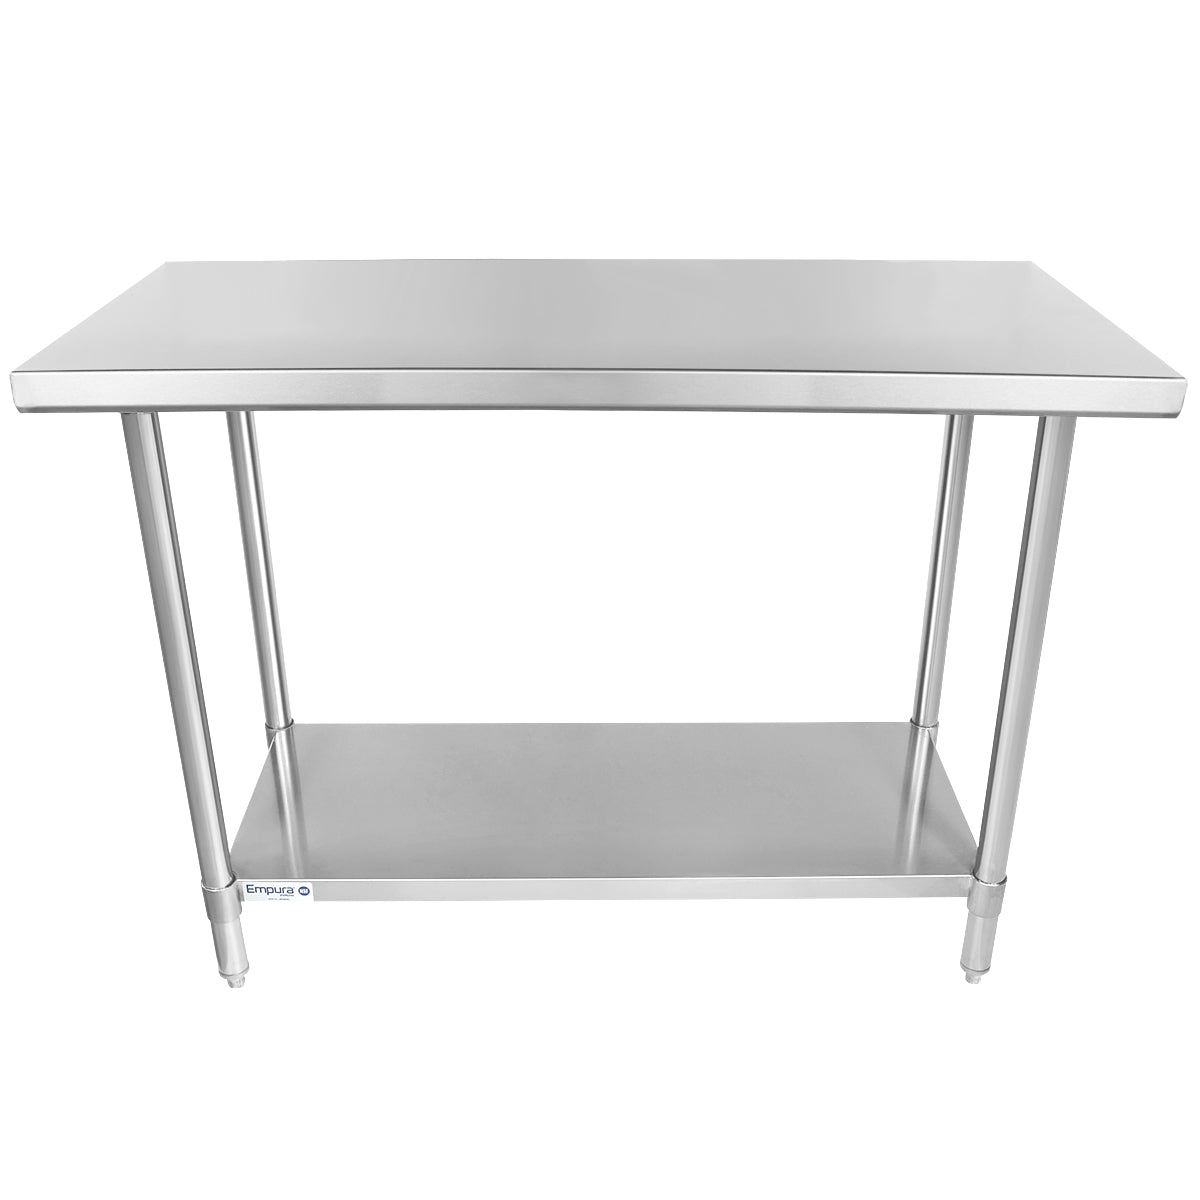 Empura 48" x 24" 16-Gauge 304 Stainless Steel Commercial Work Table with Flat Top plus 430 Stainless Steel Legs and Undershelf